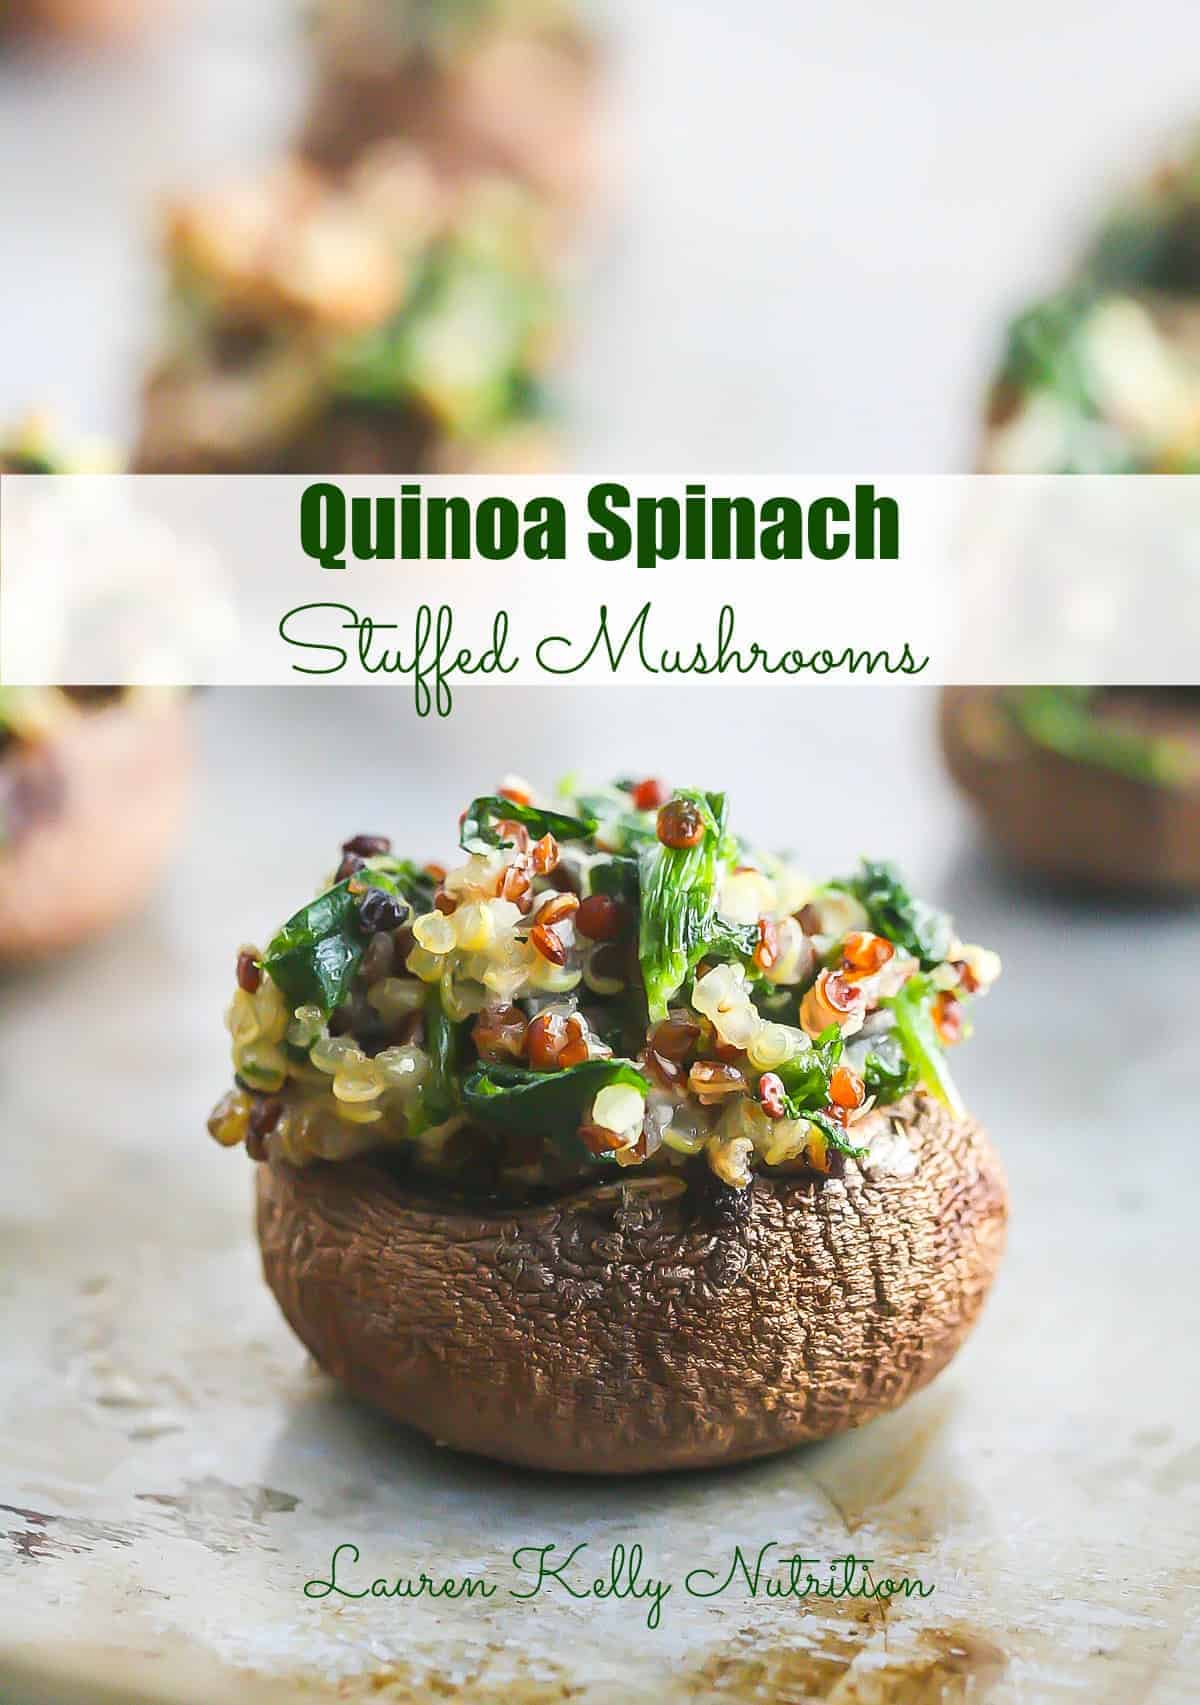 Quinoa Spinach Stuffed Mushrooms by Lauren Kelly Nutrition | Gluten Free Recipes for every meal!